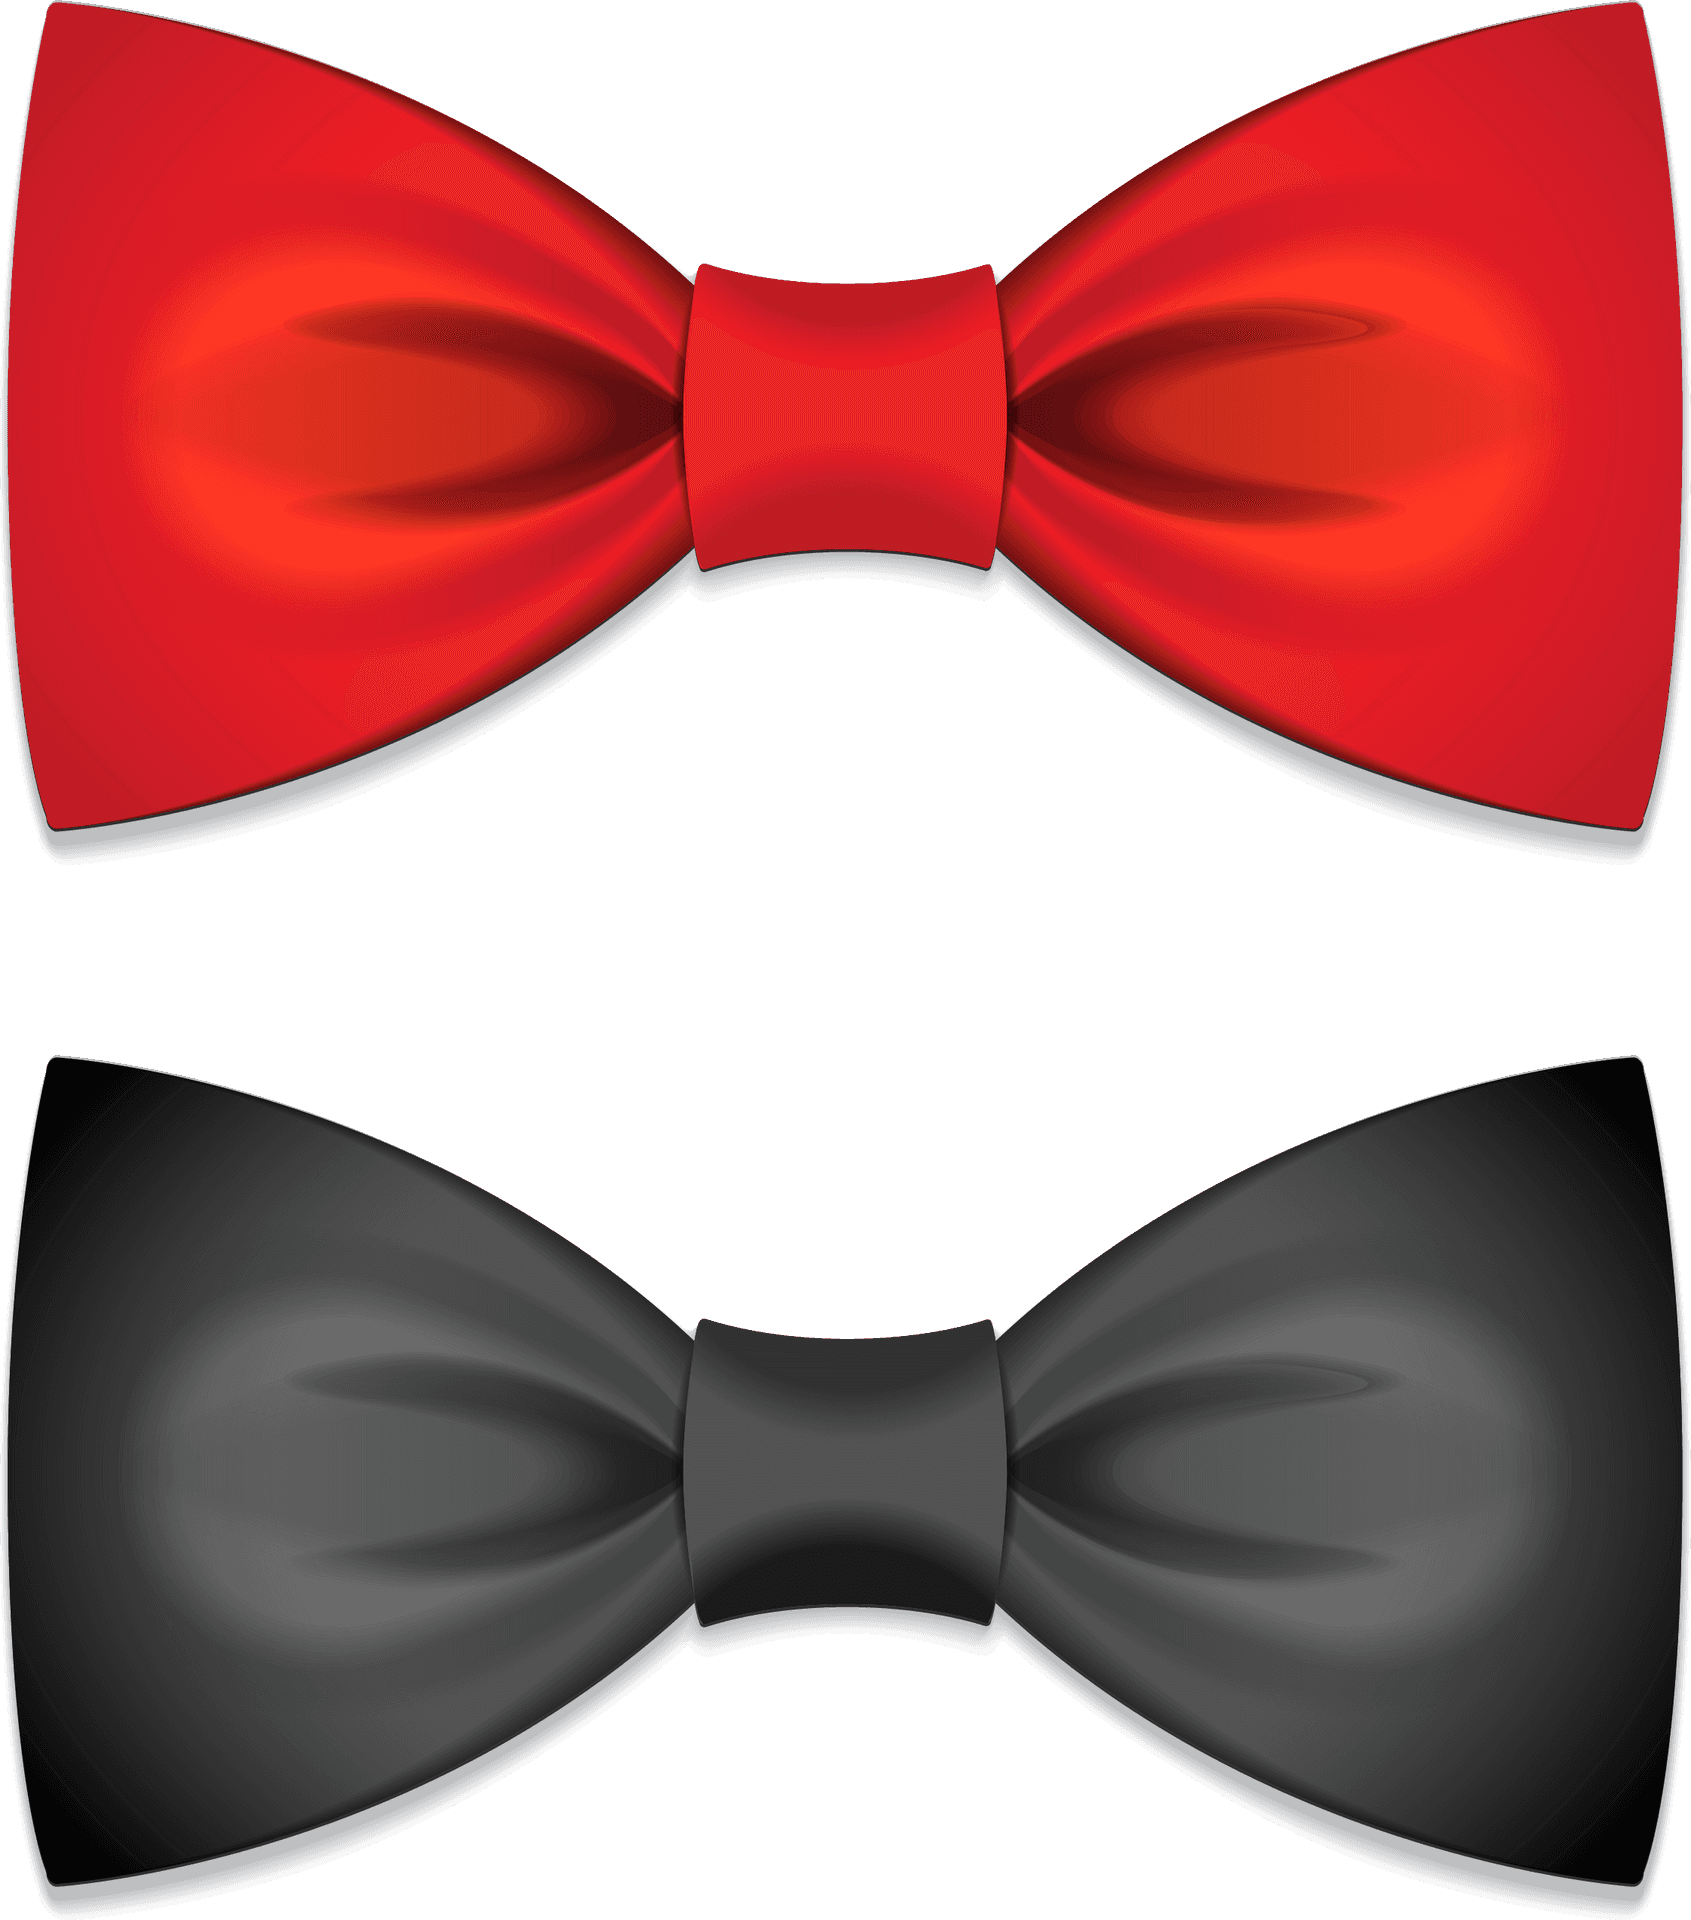 Redand Black Bow Ties PNG image